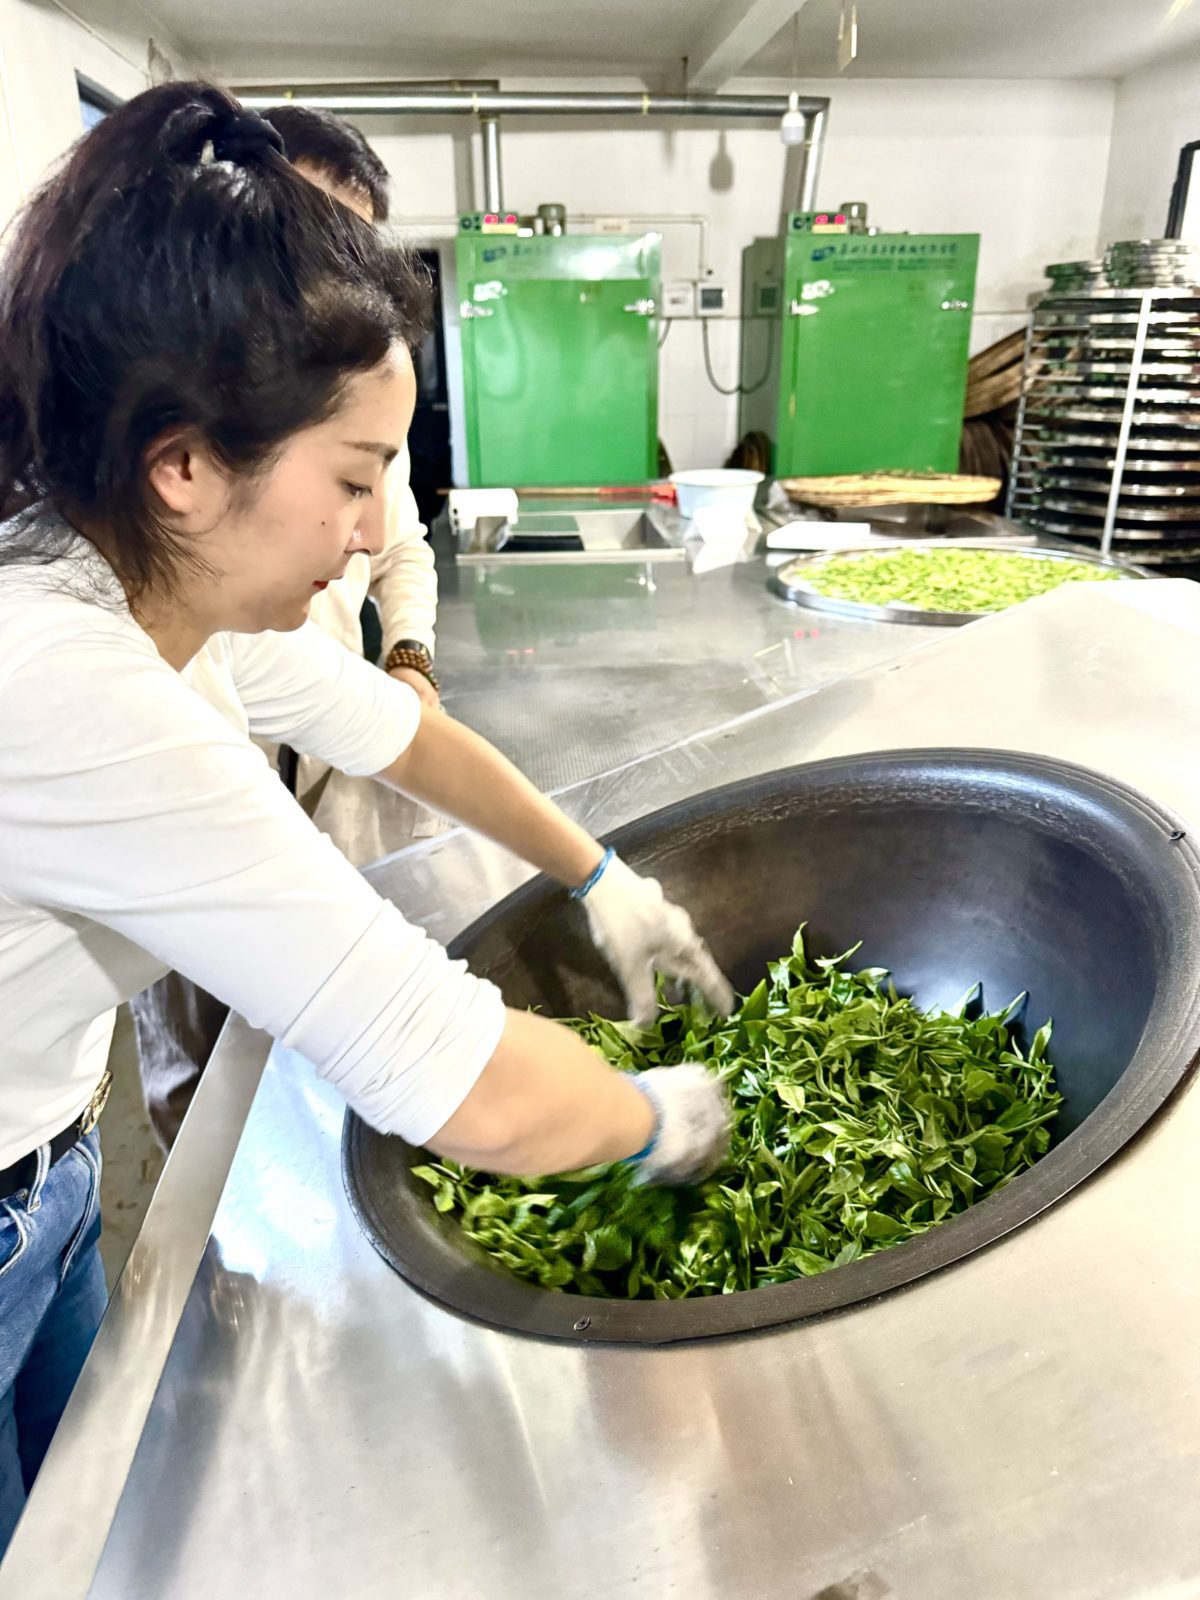 "Sha qing", or killing the green is a process of roasting the leaves in a wok, it is an important part of producing drinkable Pu'er tea